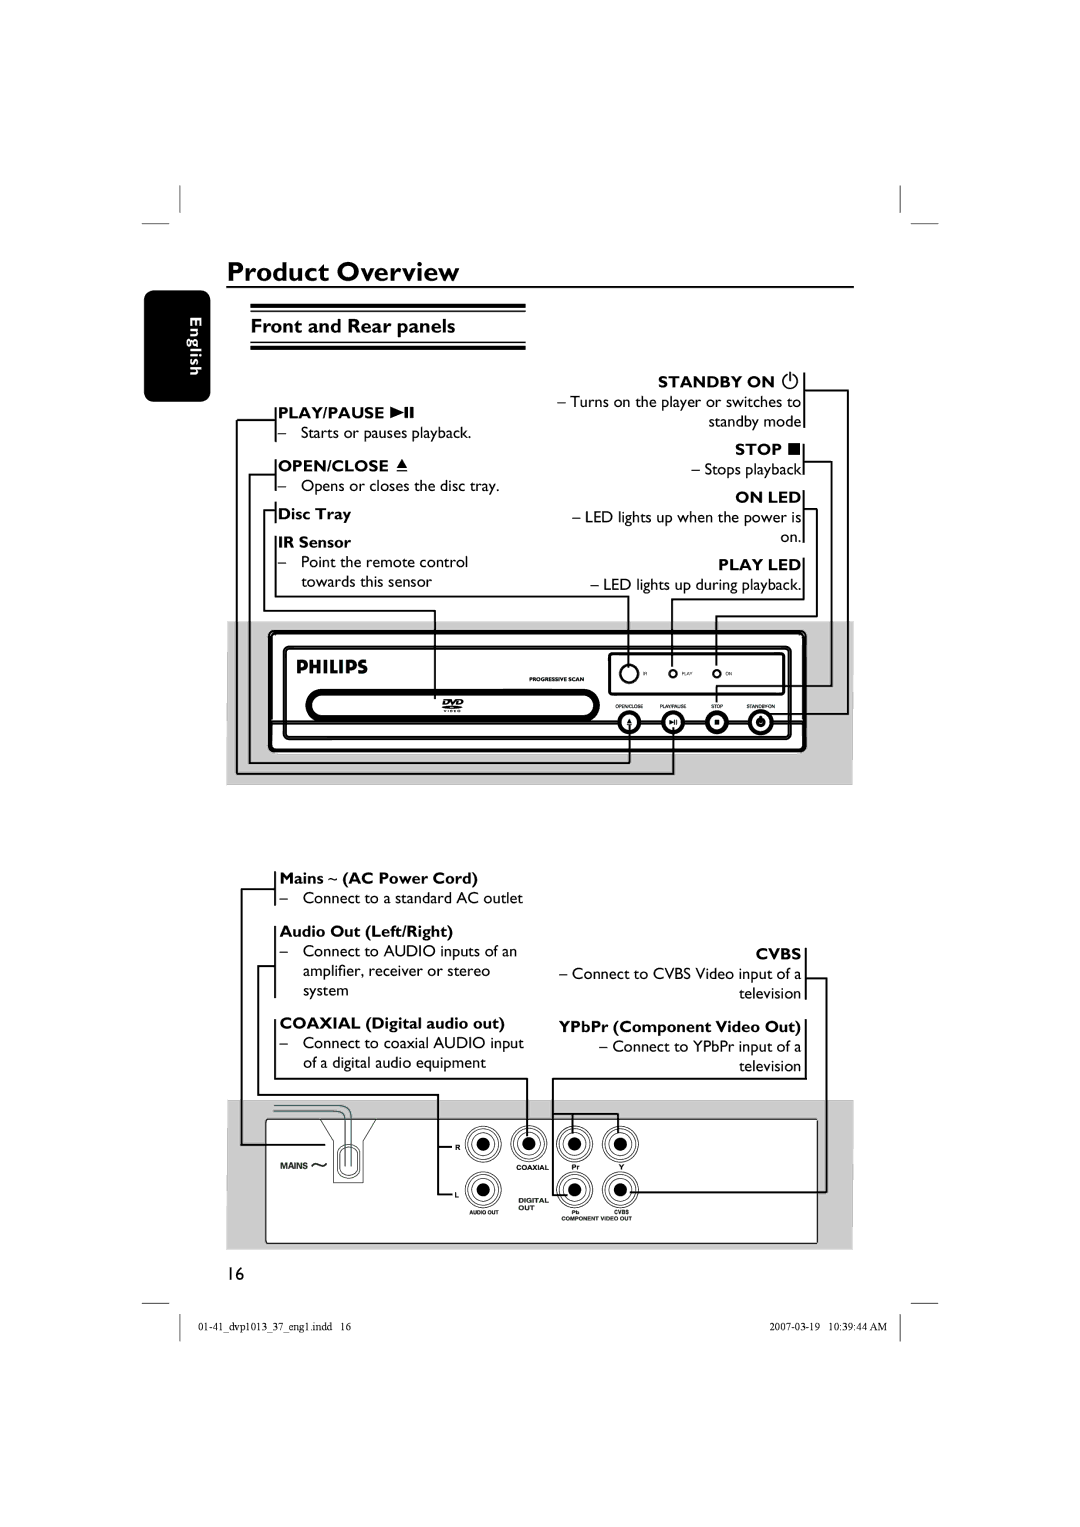 Philips DVP1013 manual Product Overview, Front and Rear panels 